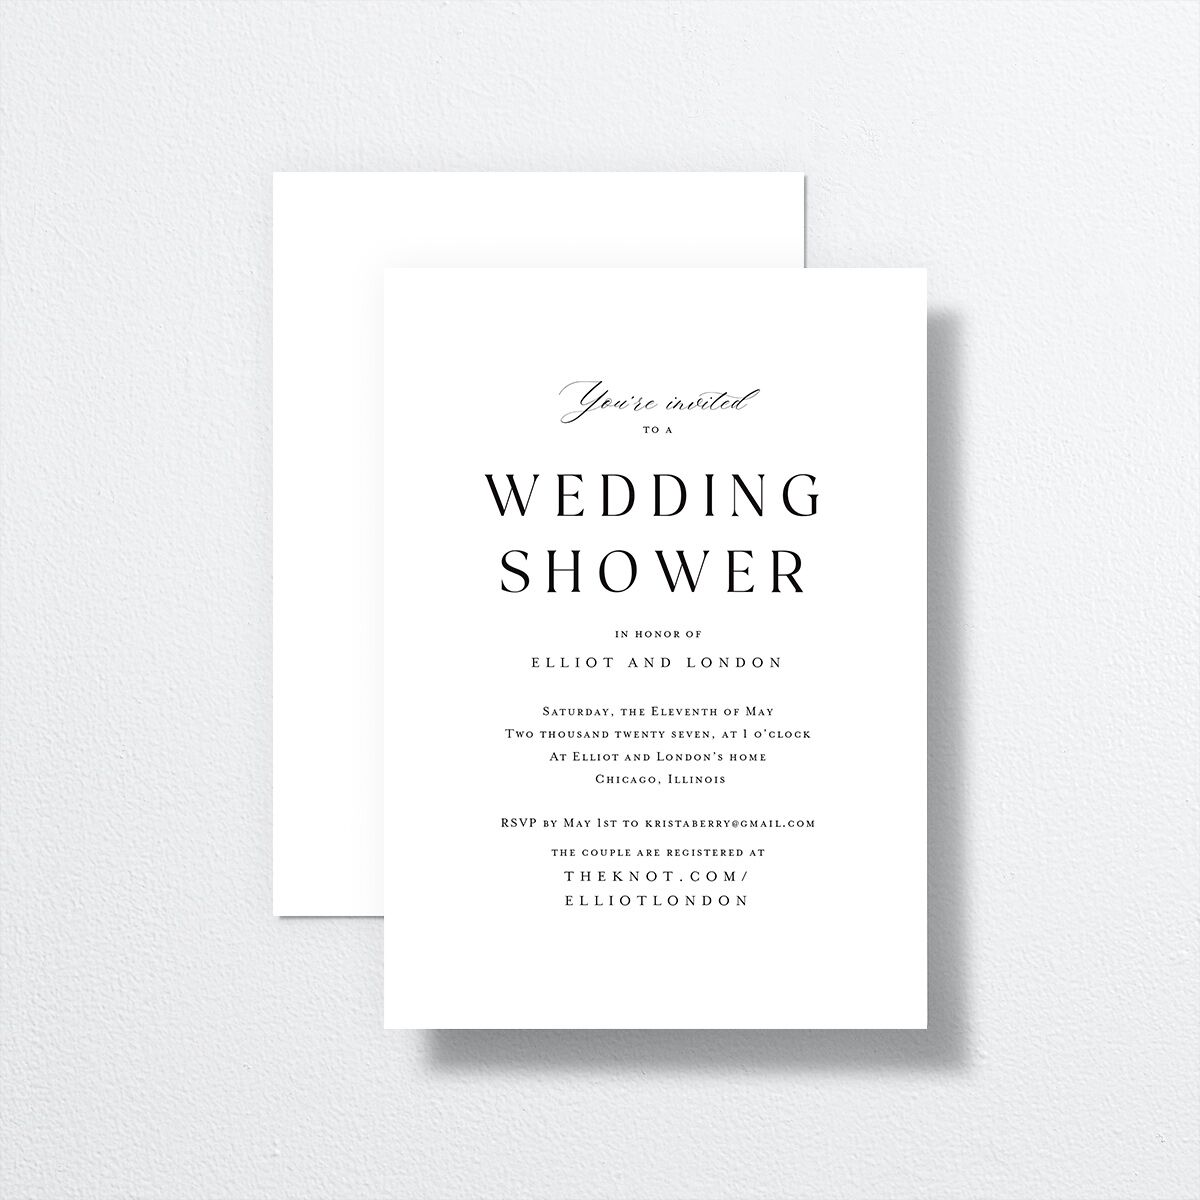 Timeless Typography Bridal Shower Invitations front-and-back in white